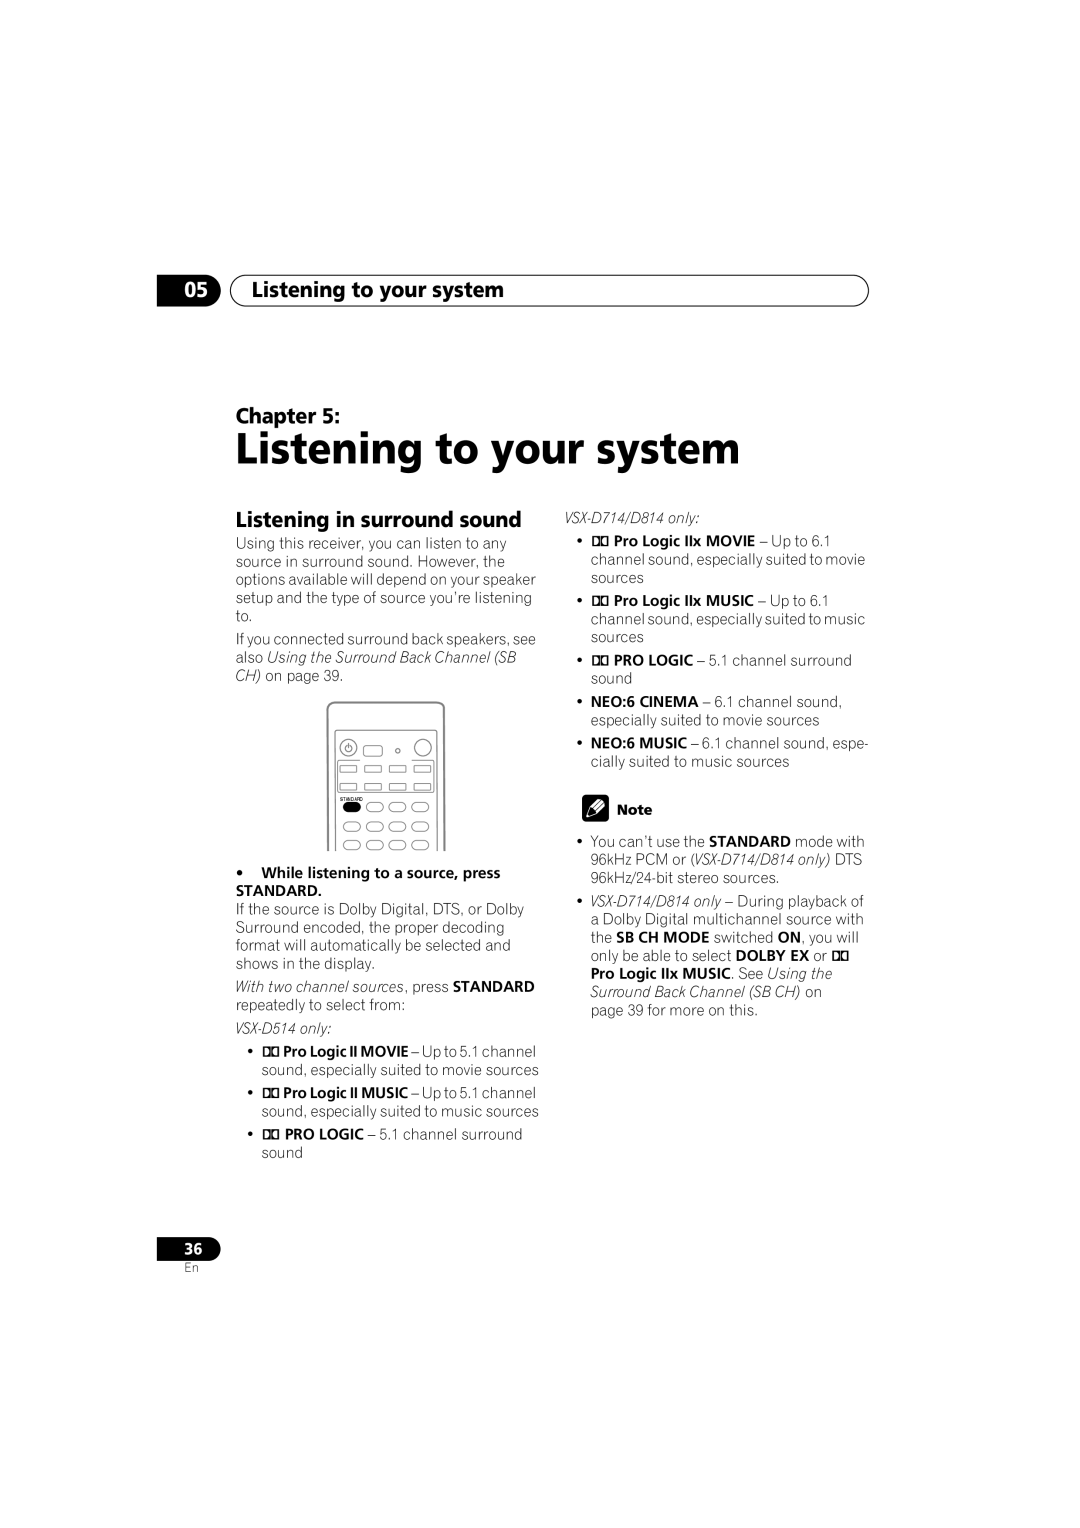 Pioneer VSX-D714 manual 05Listening to your system Chapter, Listening in surround sound, VSX-D514only 